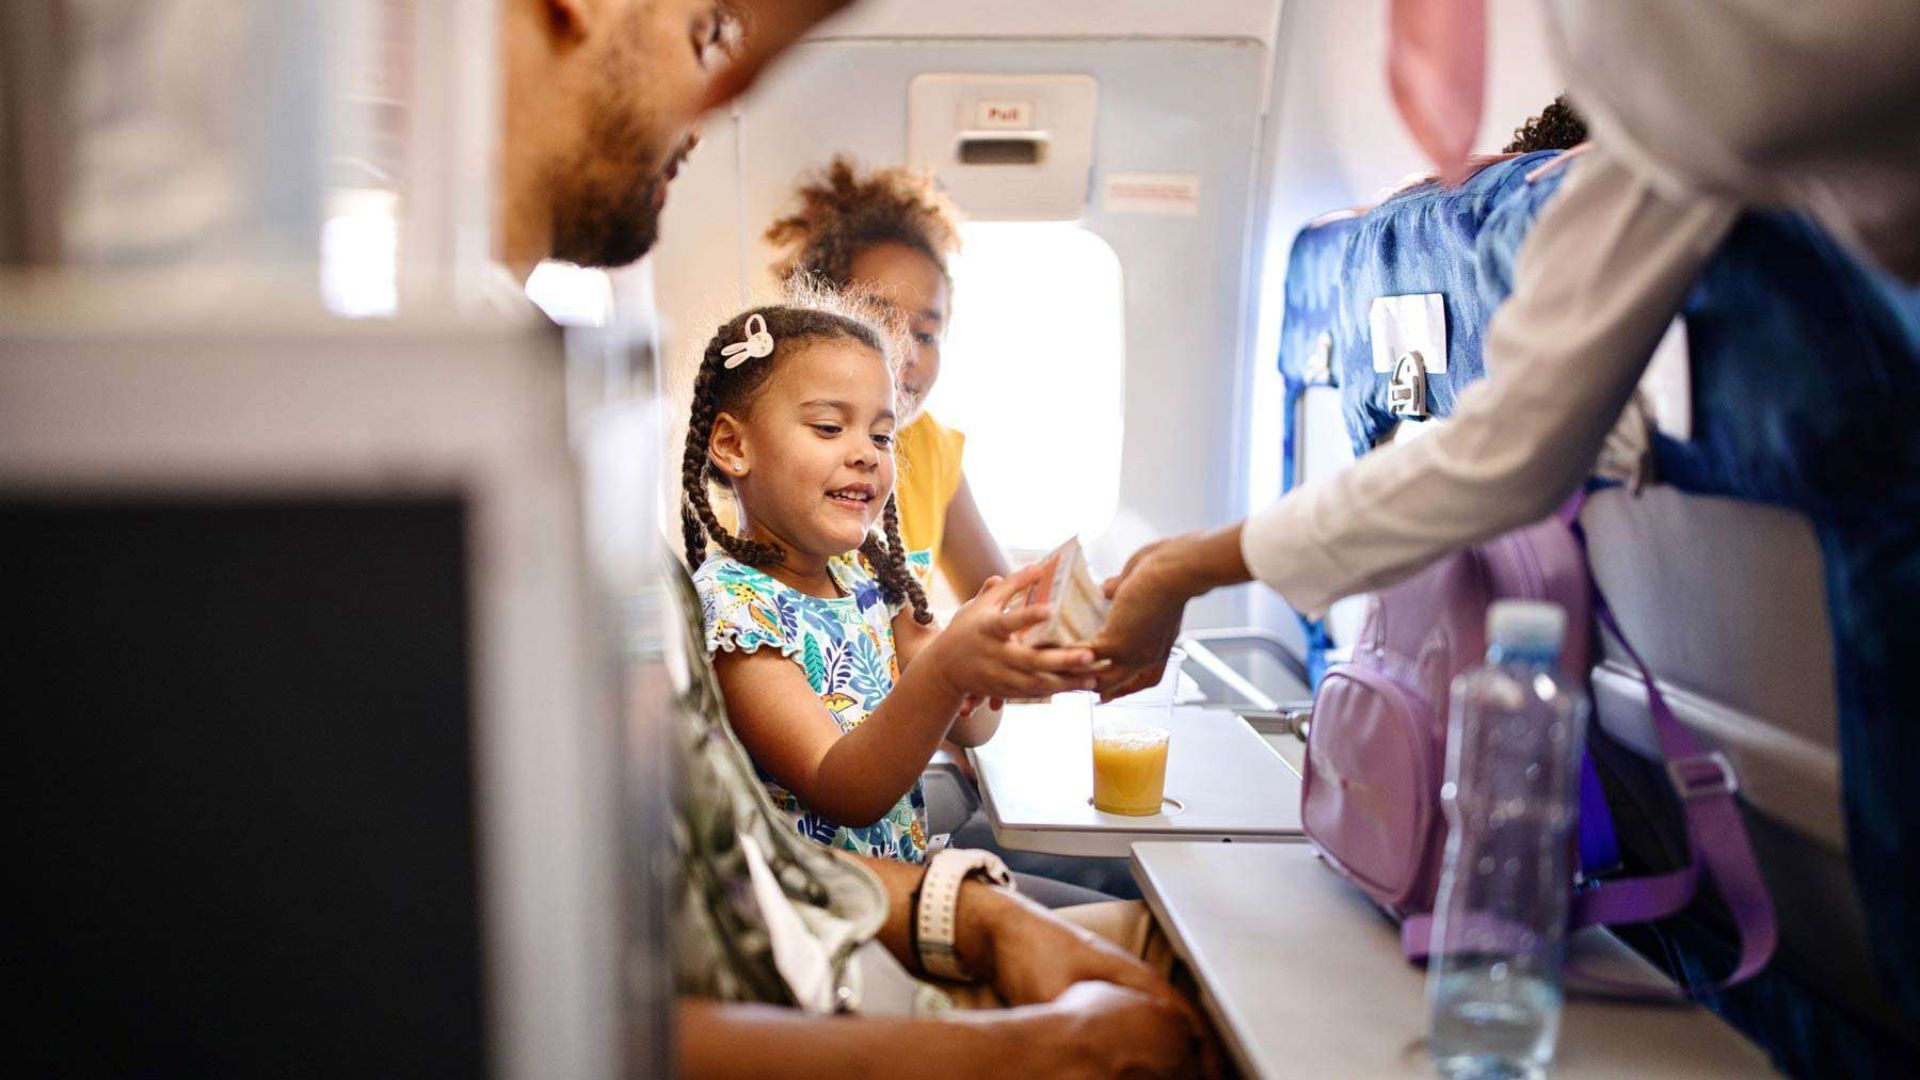 8 Airline Freebies You Didn't Know Existed In Economy, According To Flight Attendants